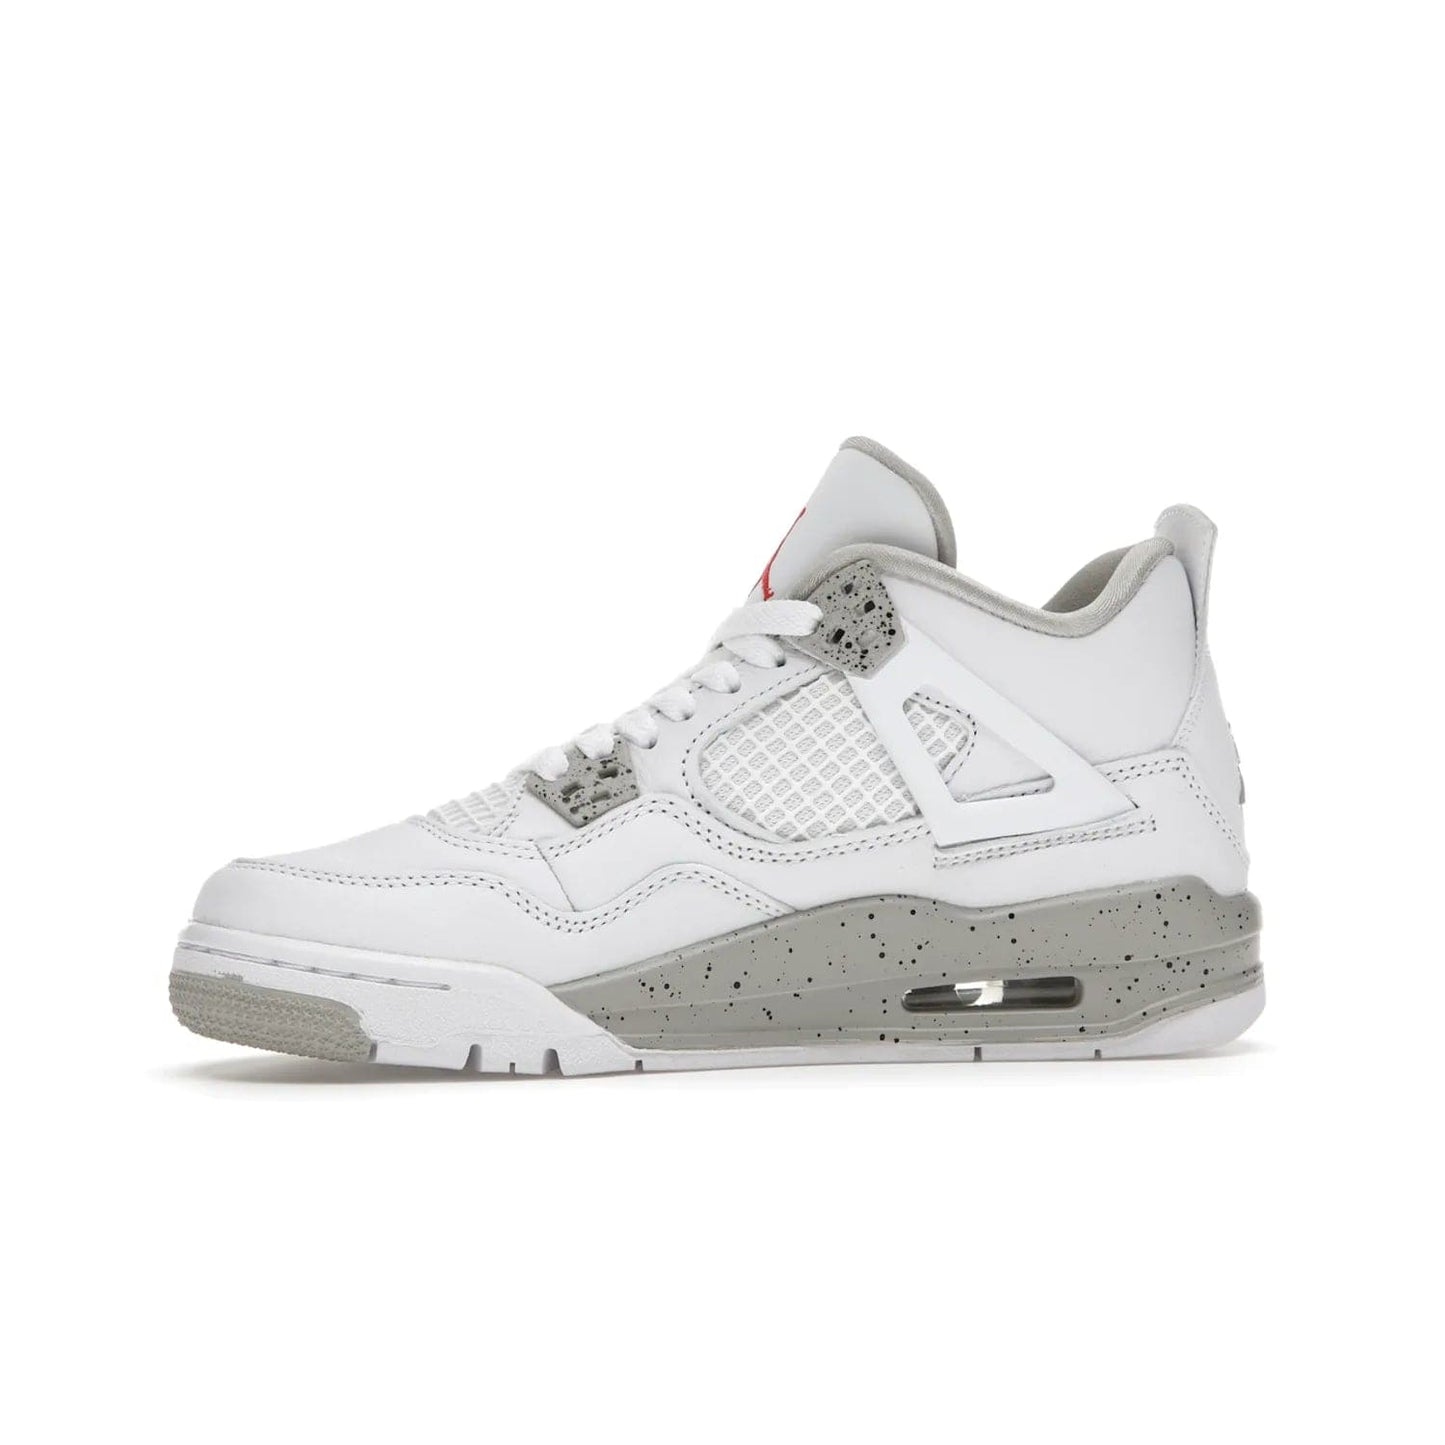 Jordan 4 Retro White Oreo (2021) (GS) - Image 18 - Only at www.BallersClubKickz.com - White Oreo Air Jordan 4 Retro 2021 GS - Iconic sneaker silhouette with white canvas upper, Tech Grey detailing, and Fire Red accents. Available July 2021.